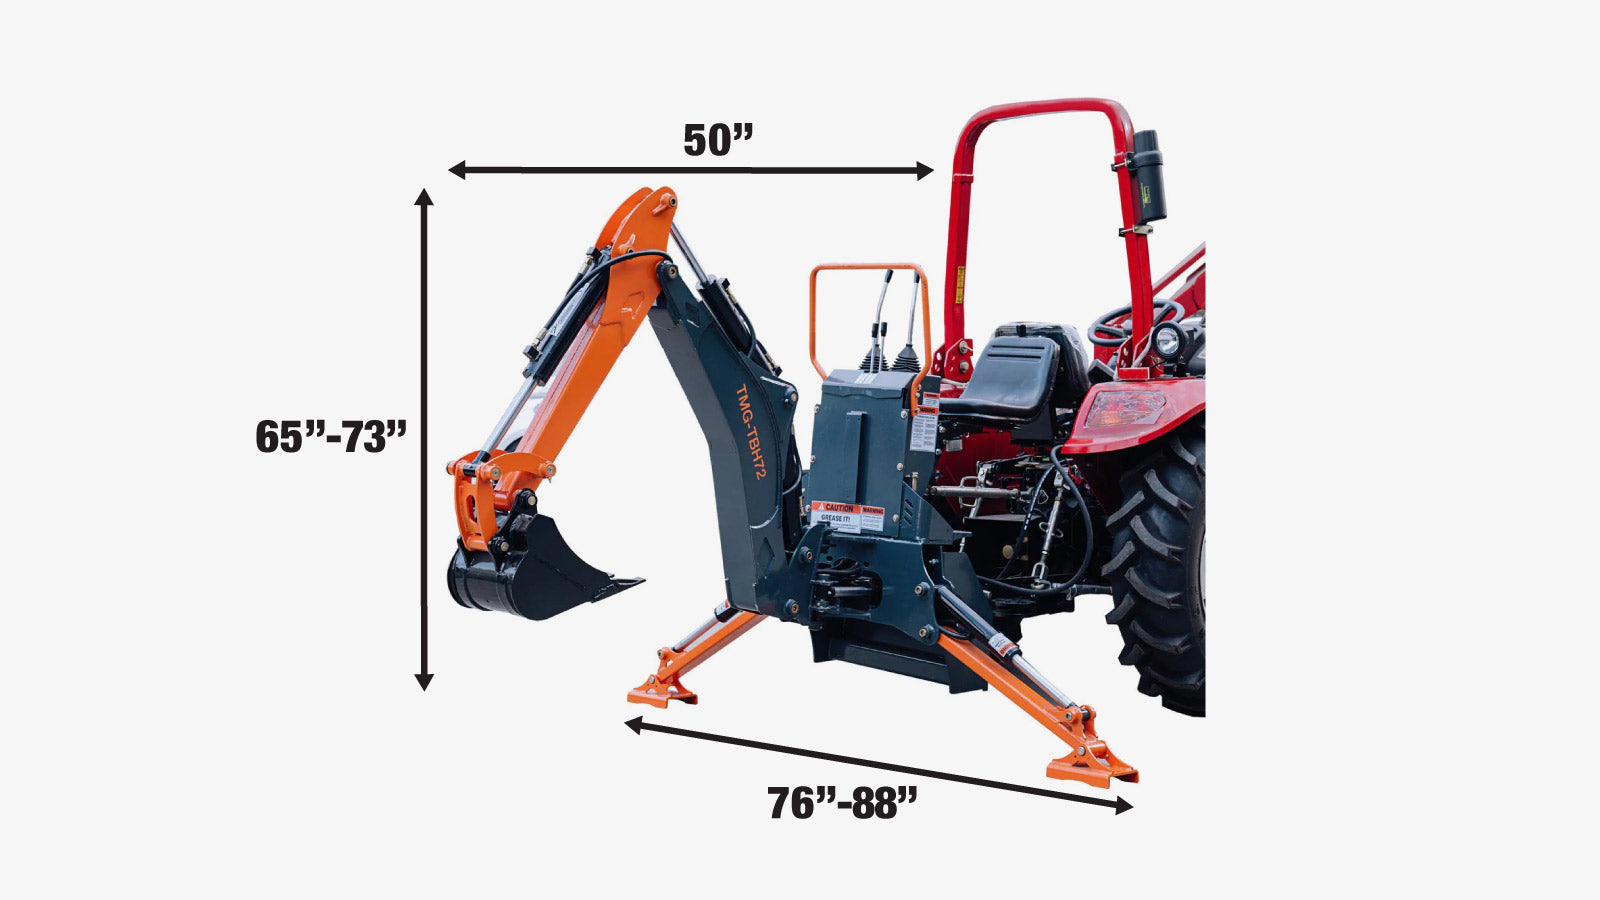 TMG Industrial 6-FT 3-Point Hitch Swing Backhoe Attachment, 12” Bucket Included, 20-65 HP Tractor, 114” High Reach, Category 1 & 2 Hookups, TMG-TBH72-specifications-image